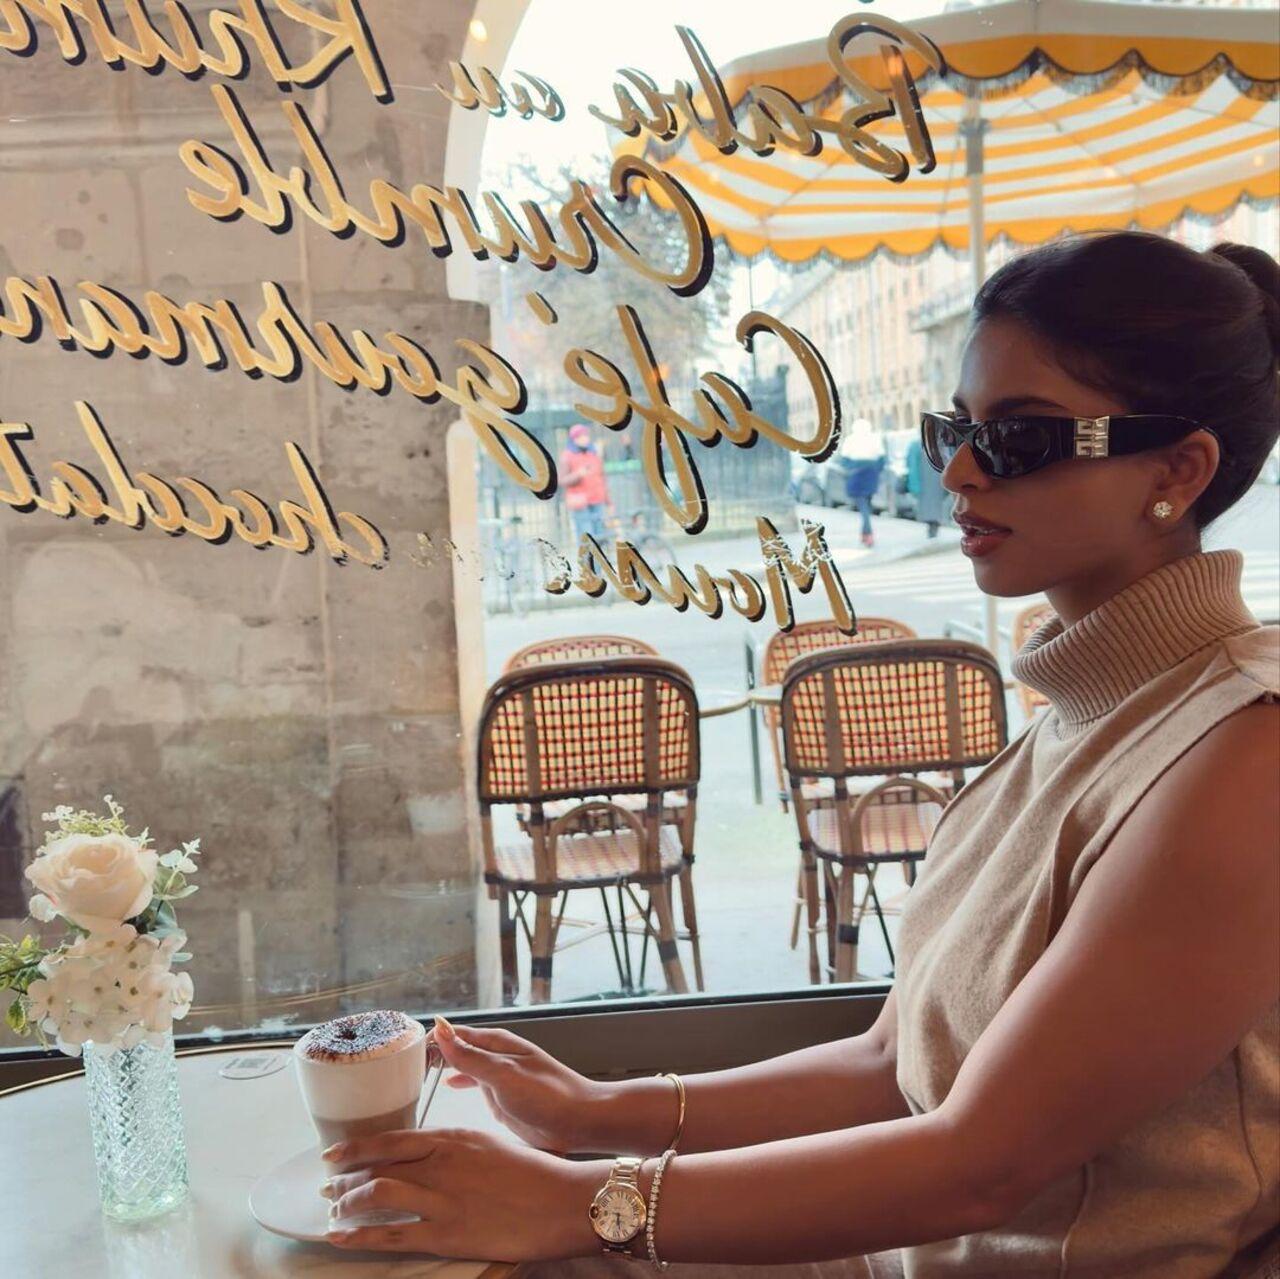 The Archies star looked uber stylish as she posed in coffee shop in brown top and stylish glasses